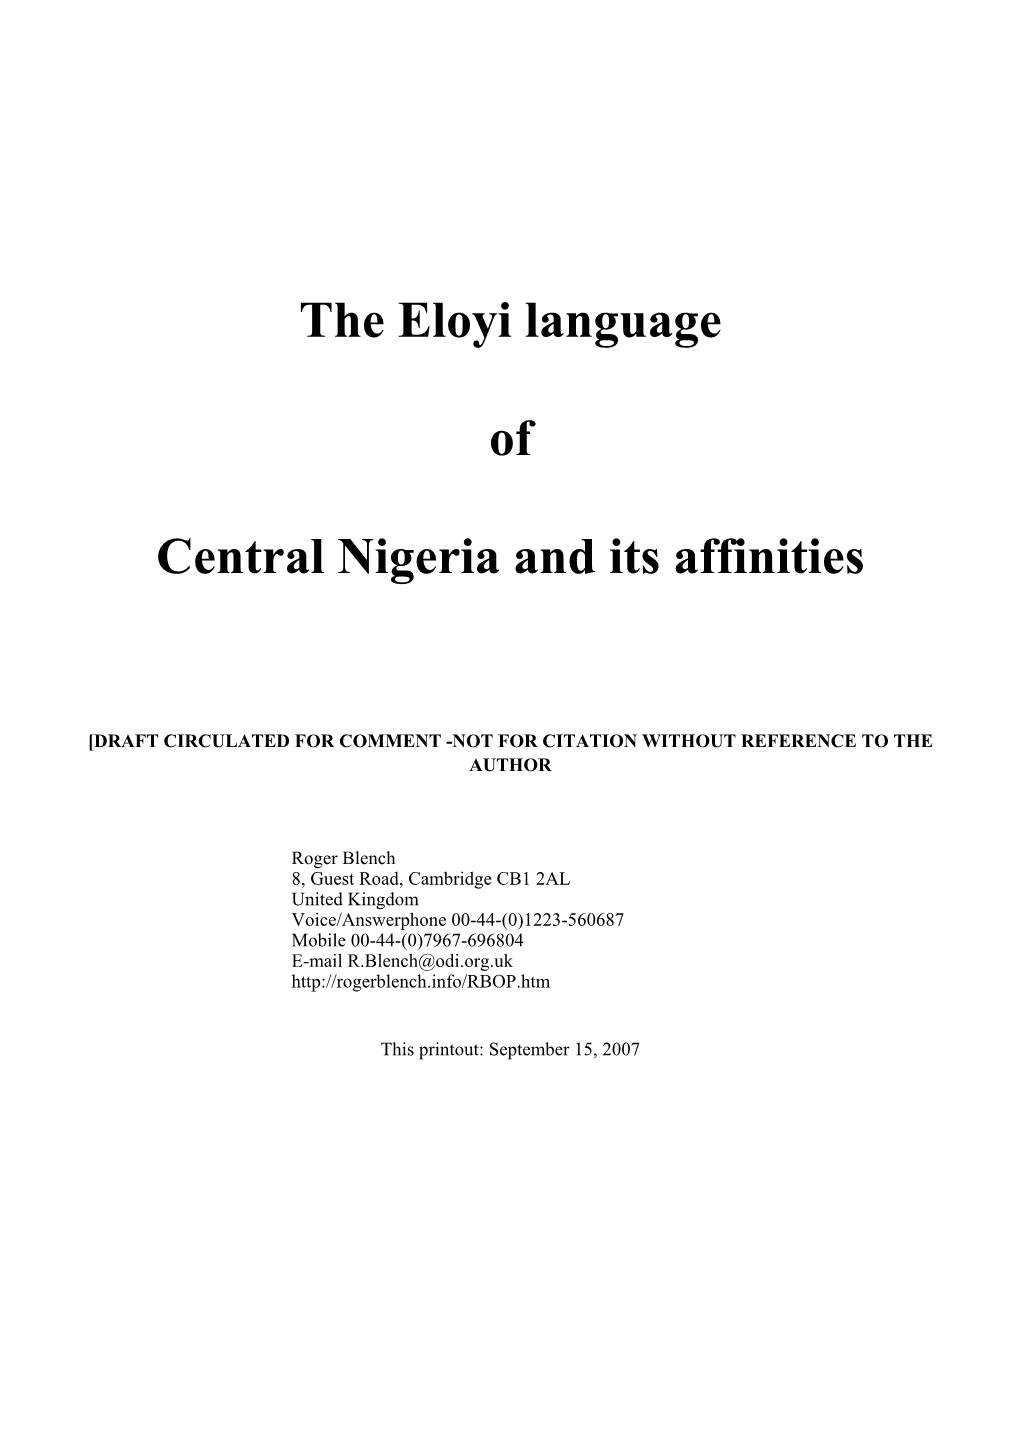 The Eloyi Language of Central Nigeria and Its Affinities